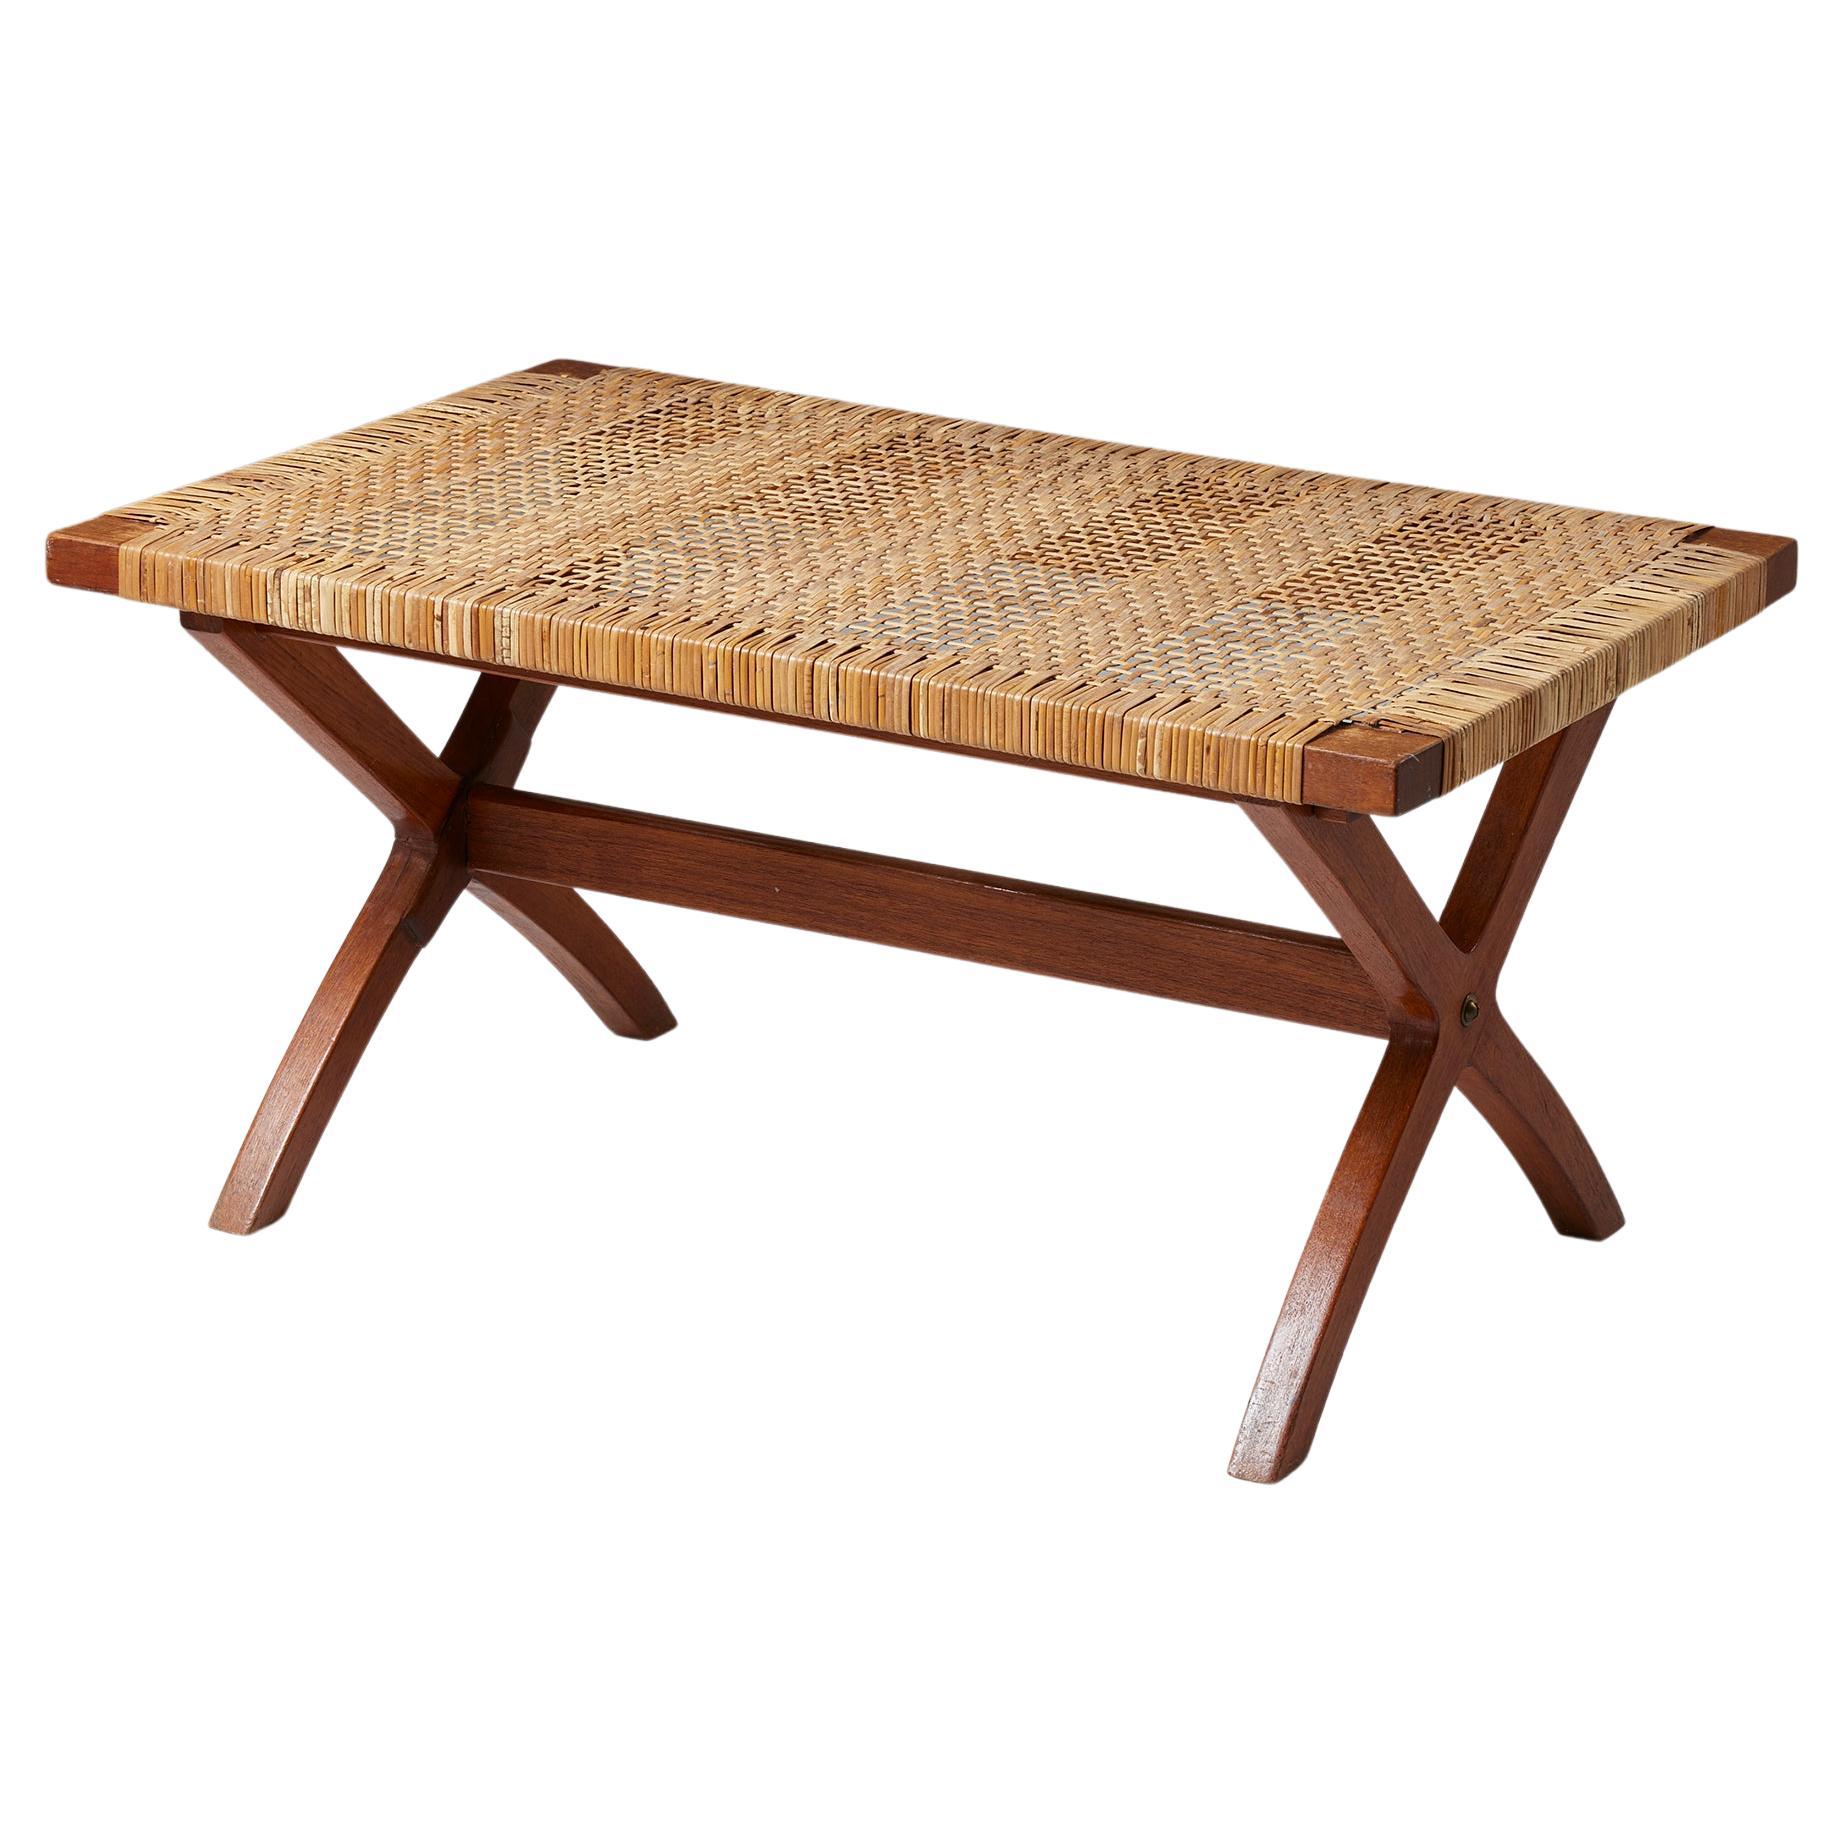 Table / Bench, Anonymous, Denmark, 1950s - 1960s